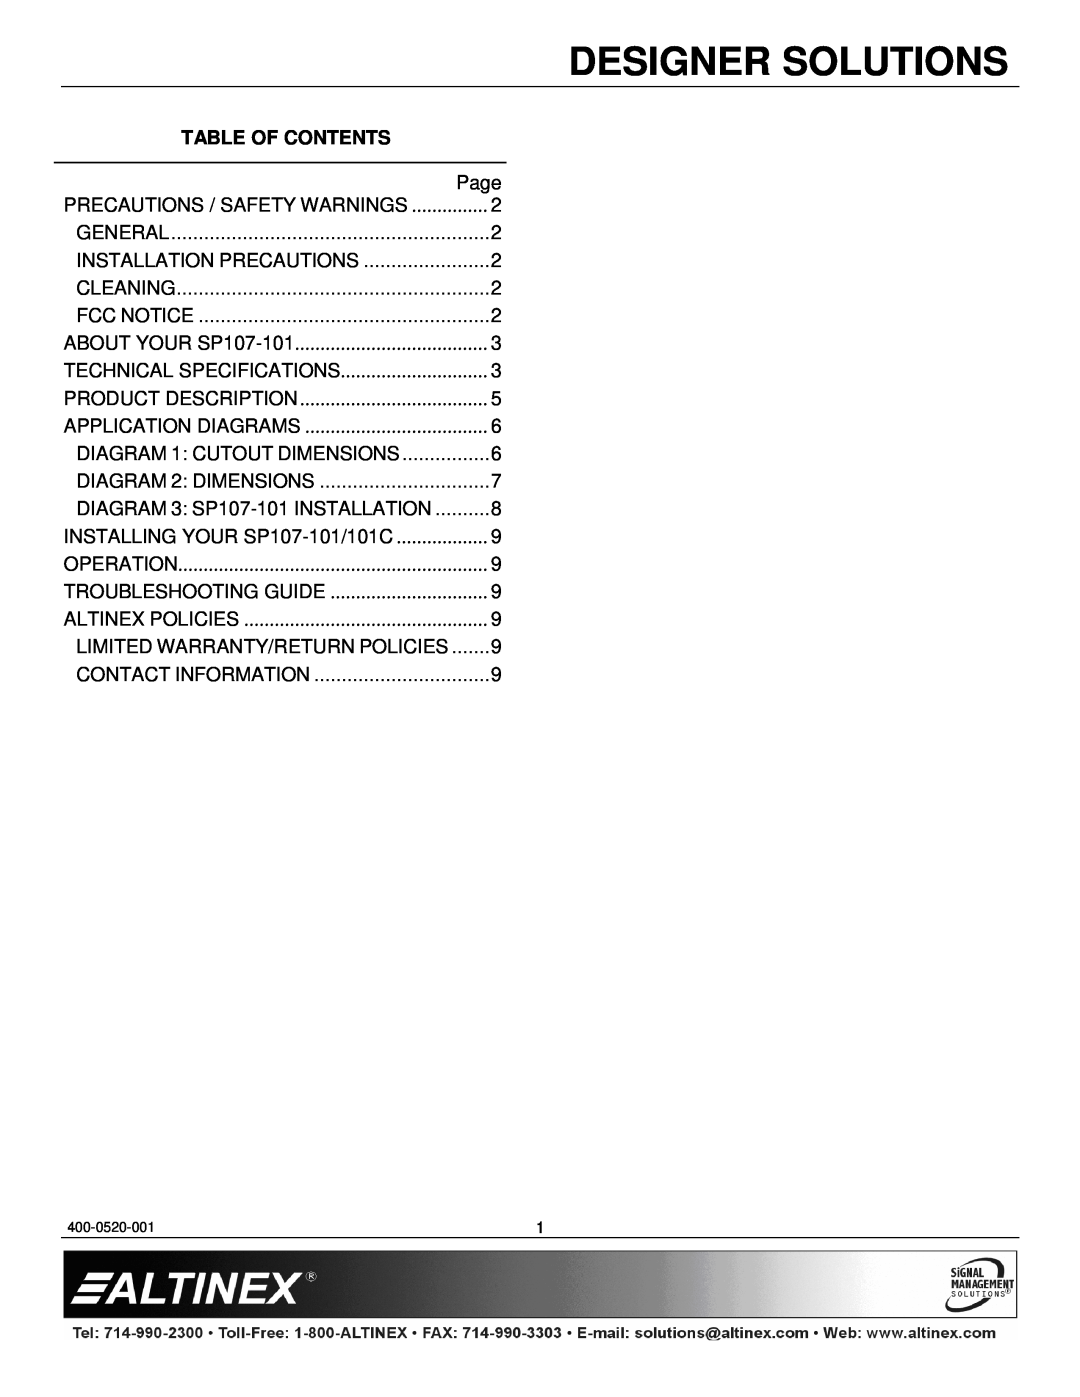 Altinex SP107-101/101C Designer Solutions, Table Of Contents, ABOUT YOUR SP107-101, Technical Specifications, Operation 